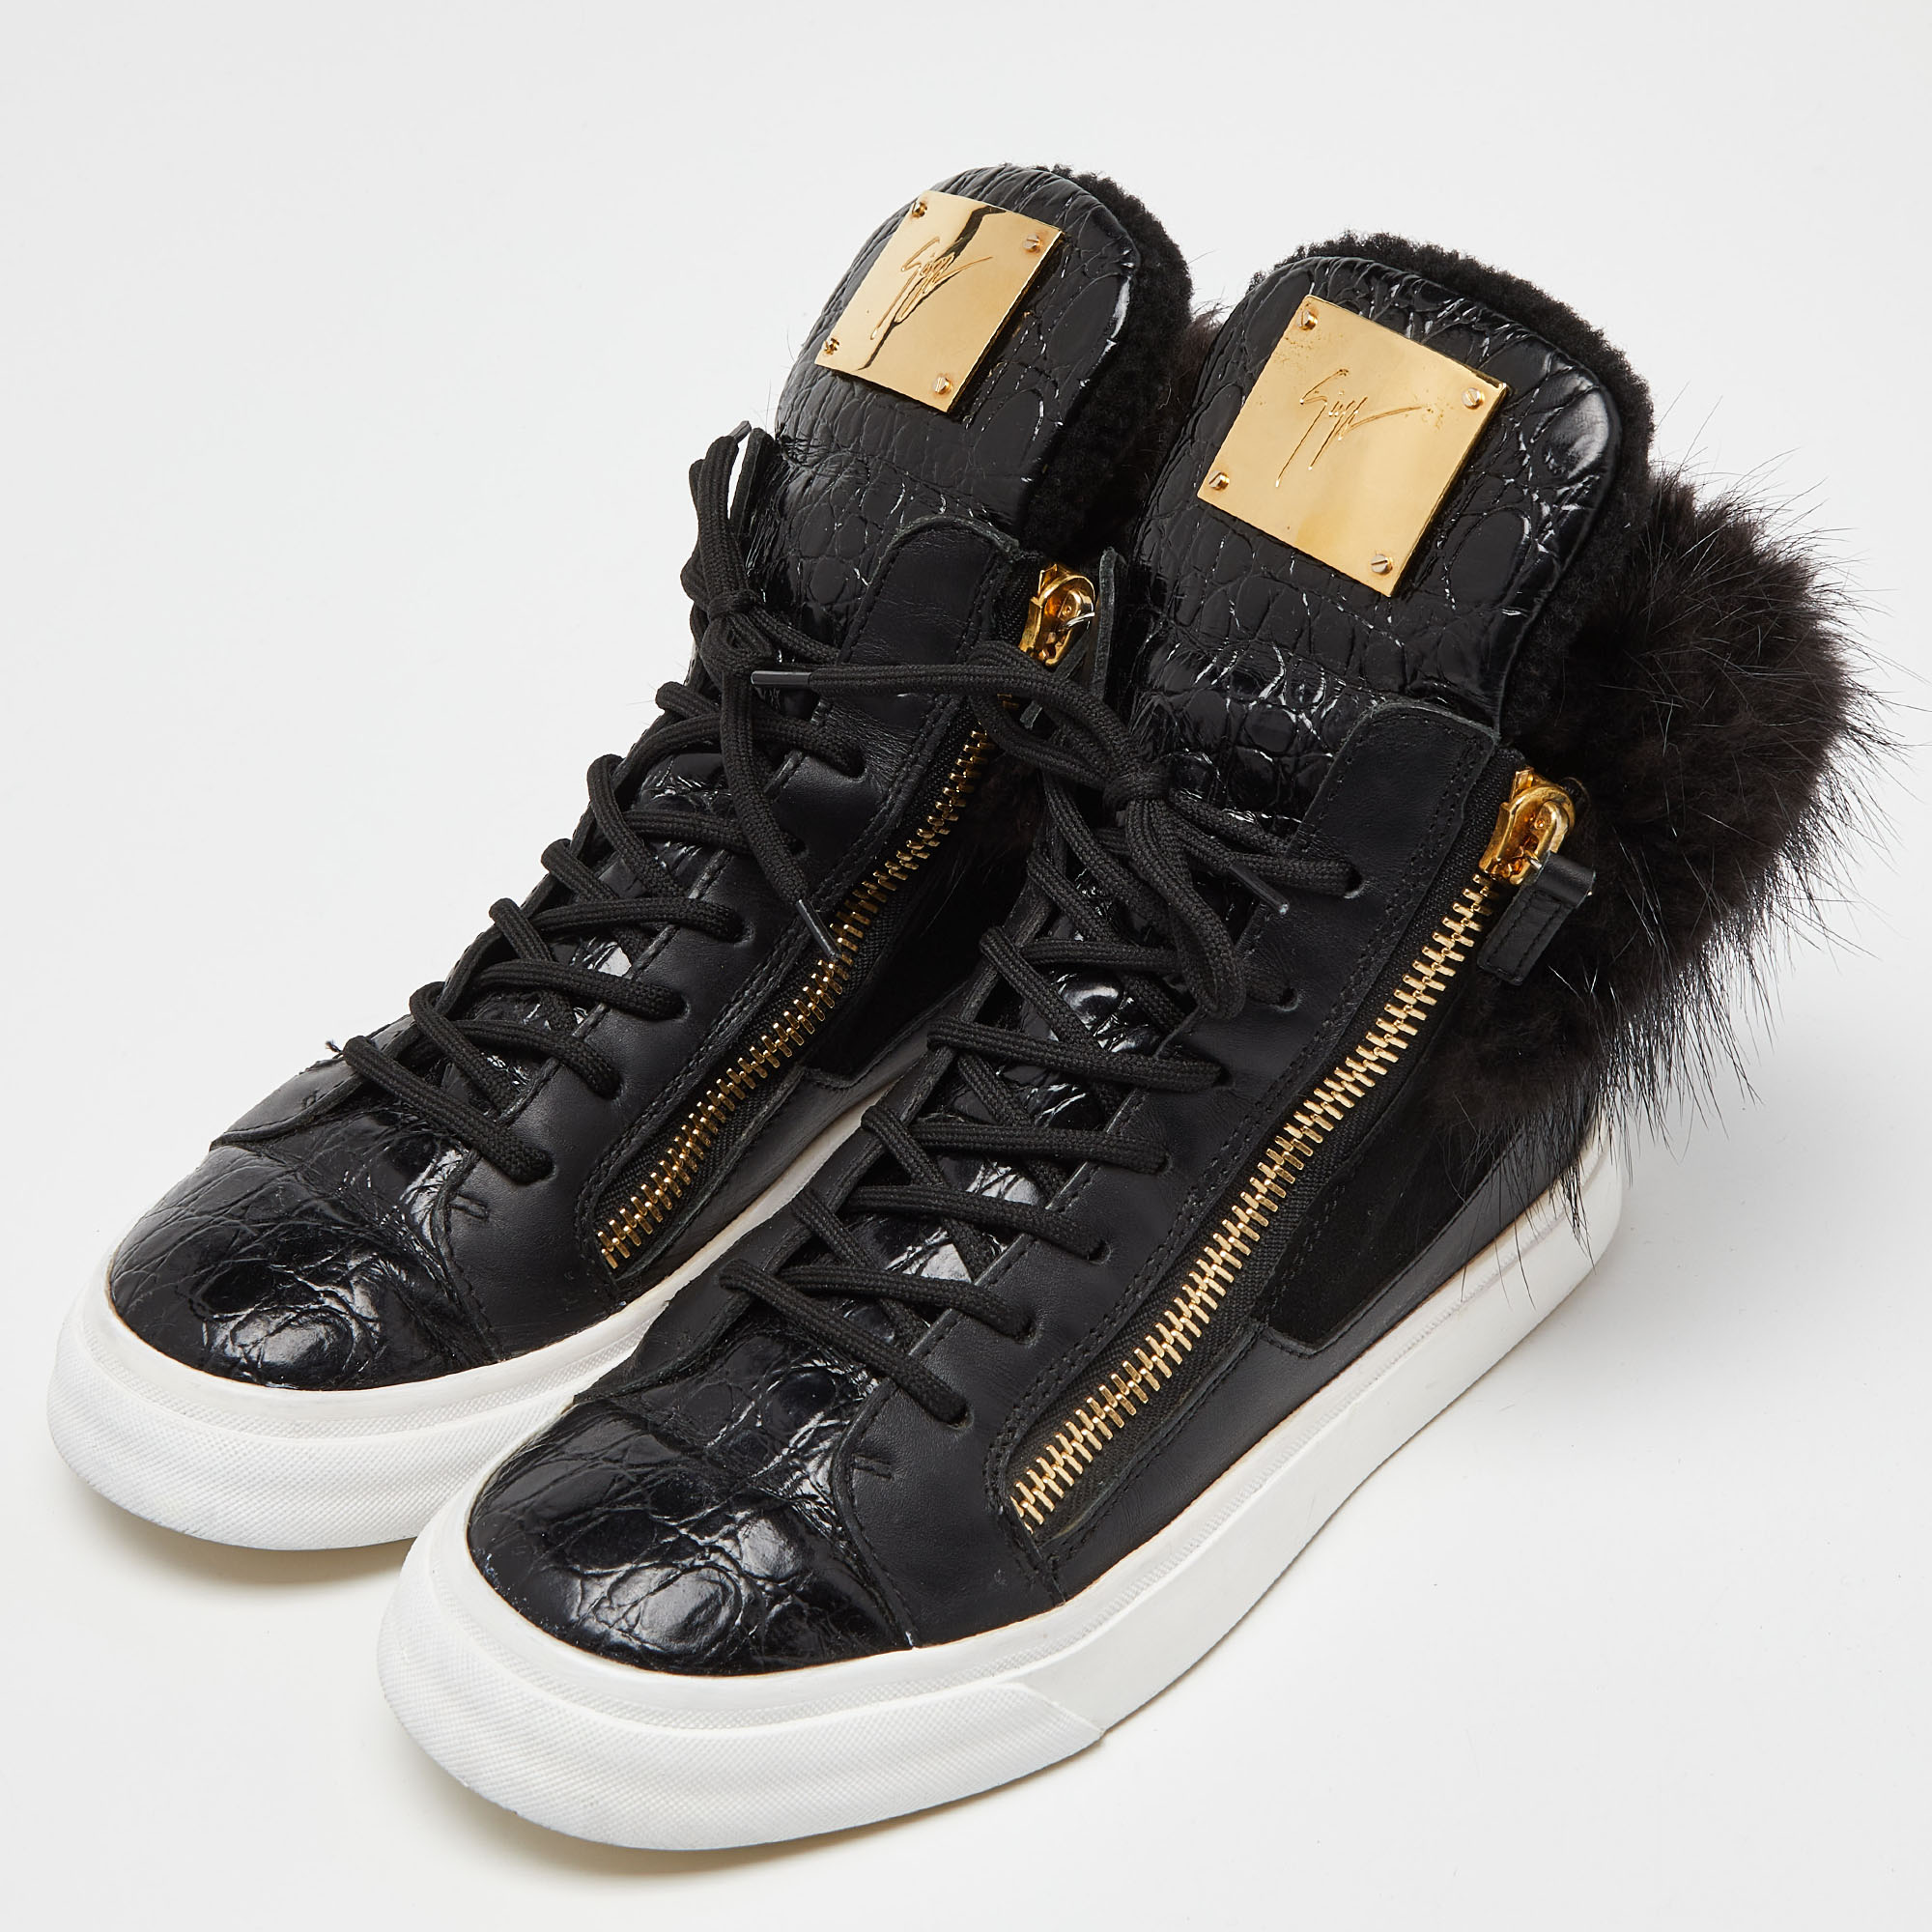 

Giuseppe Zanotti Black Leather,Suede and Calfhair London High-Top Sneakers Size